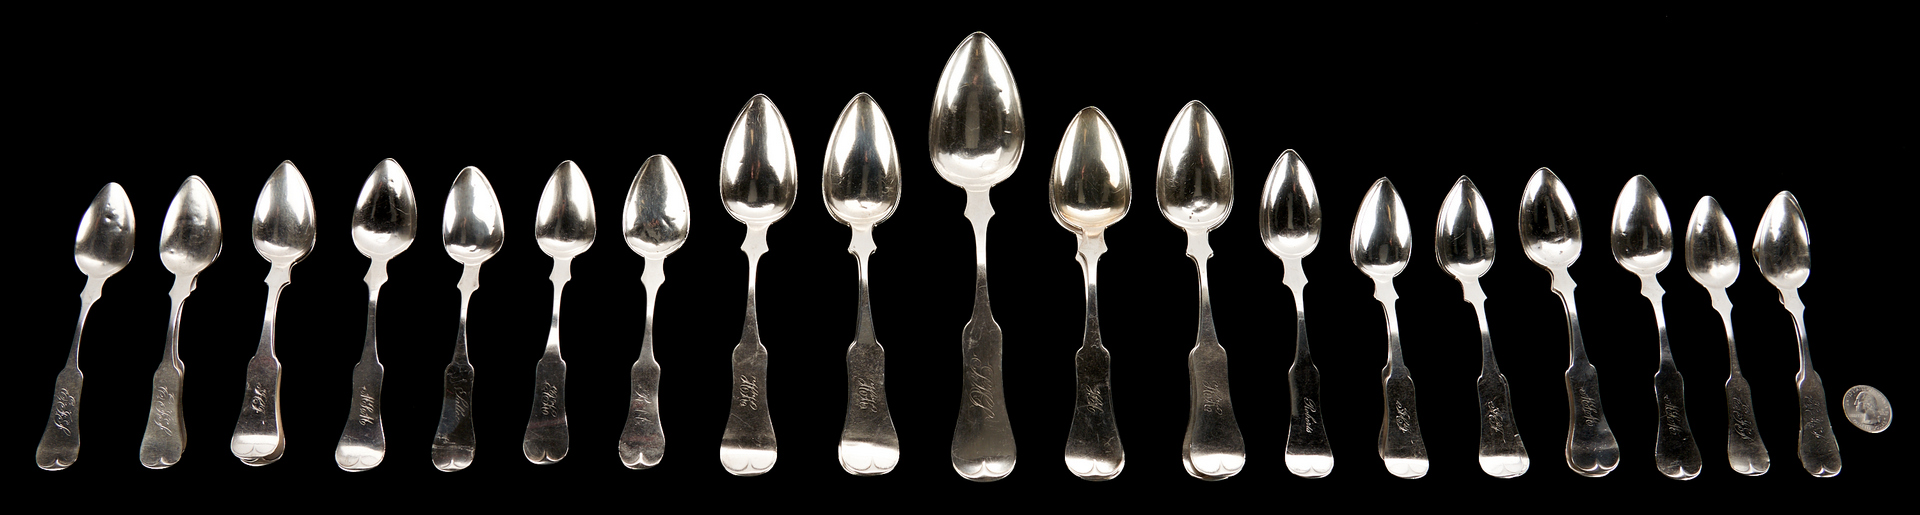 Lot 47: 29 McDannold KY Coin Silver Spoons